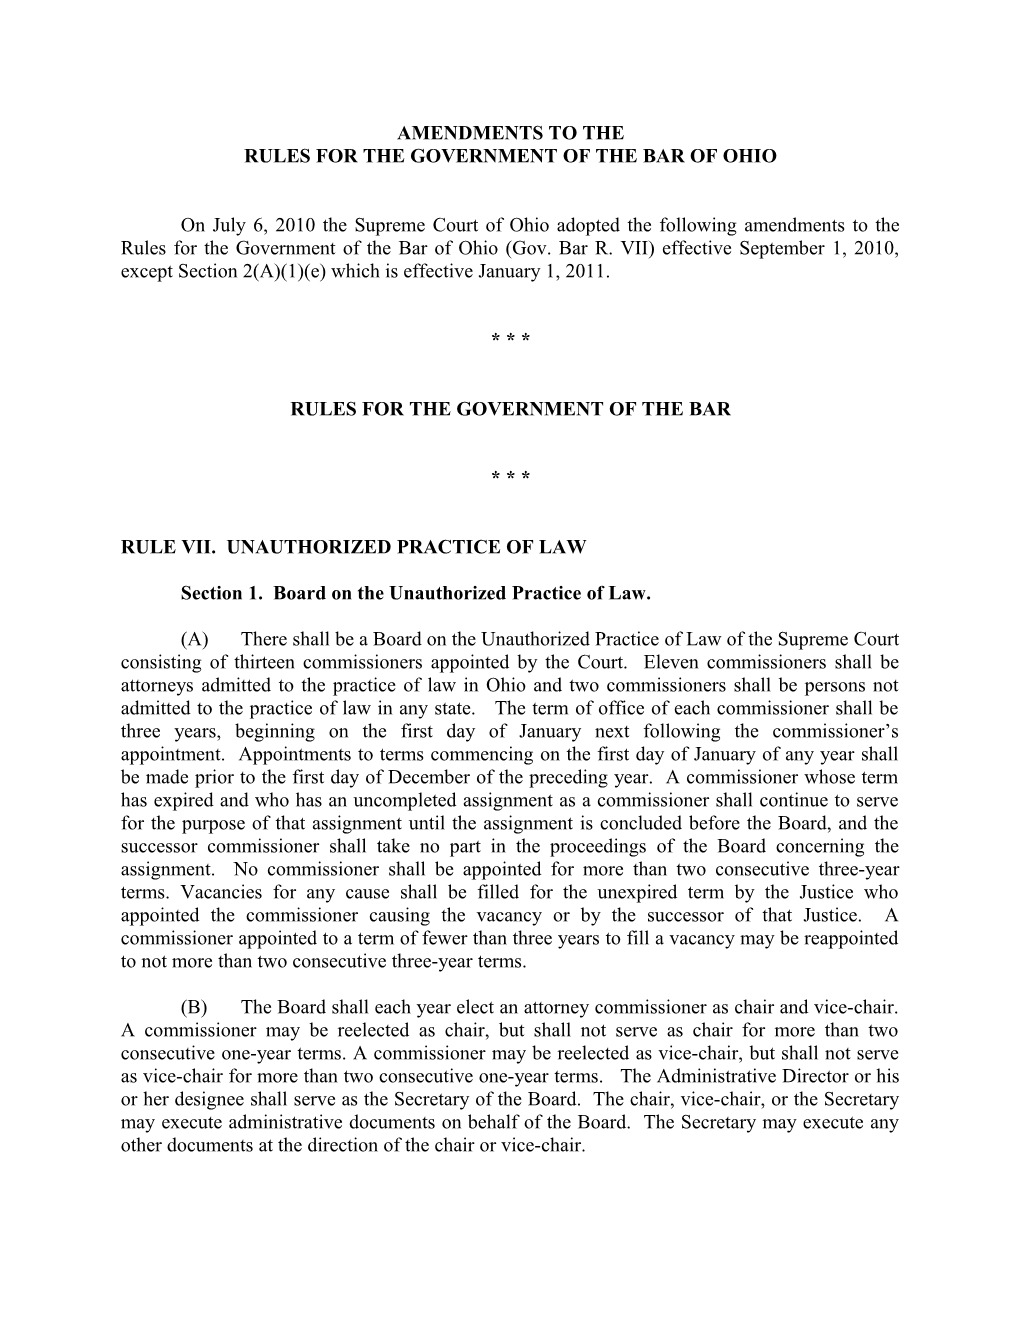 Rules for the Government of the Bar of Ohio